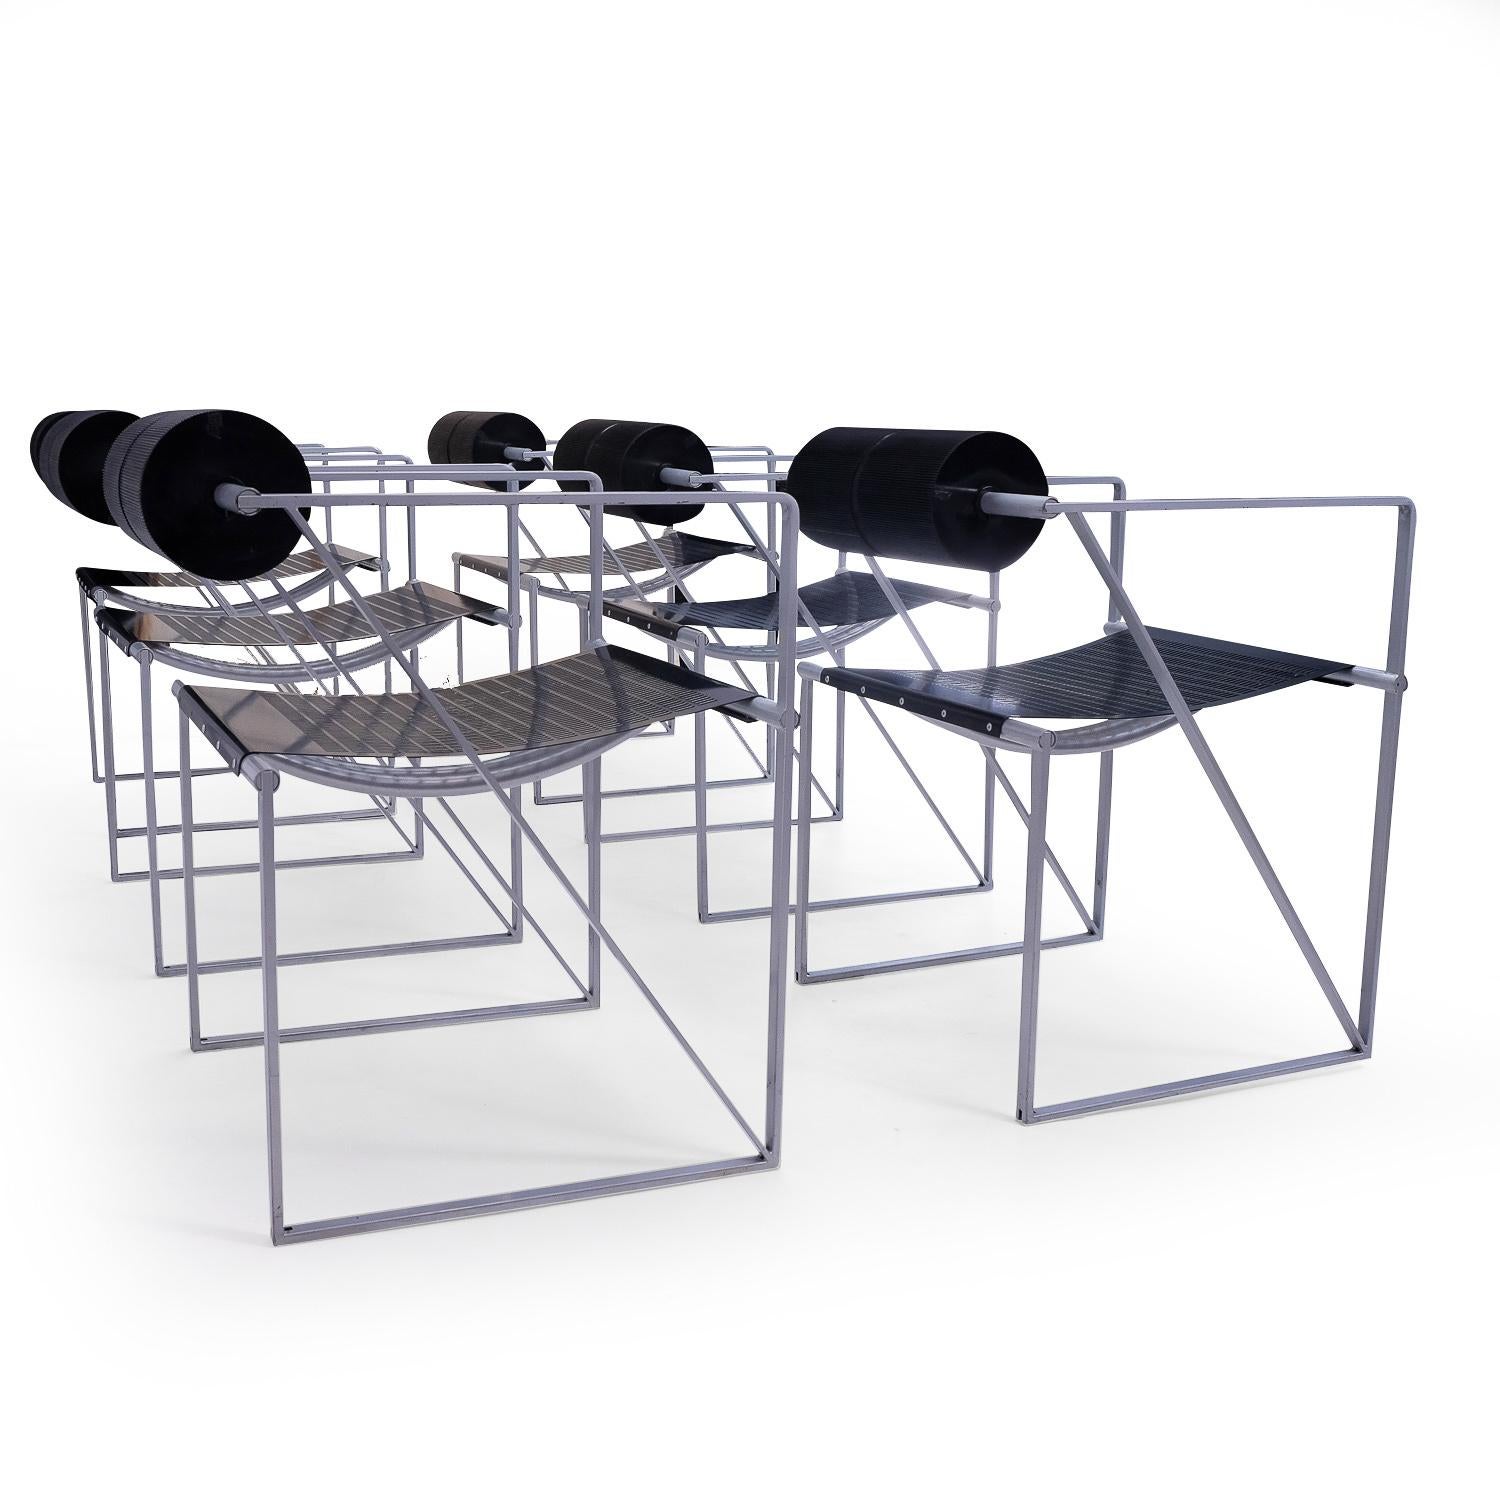 Set of 6 vintage Seconda chairs by Mario Botta for Alias, 1980s

The Seconda chair (1982) is an iconic piece of design, with use of materials that are typical for Botta’s furniture and lamps: Sheet metal, metal tubing, plastic and rubber. The